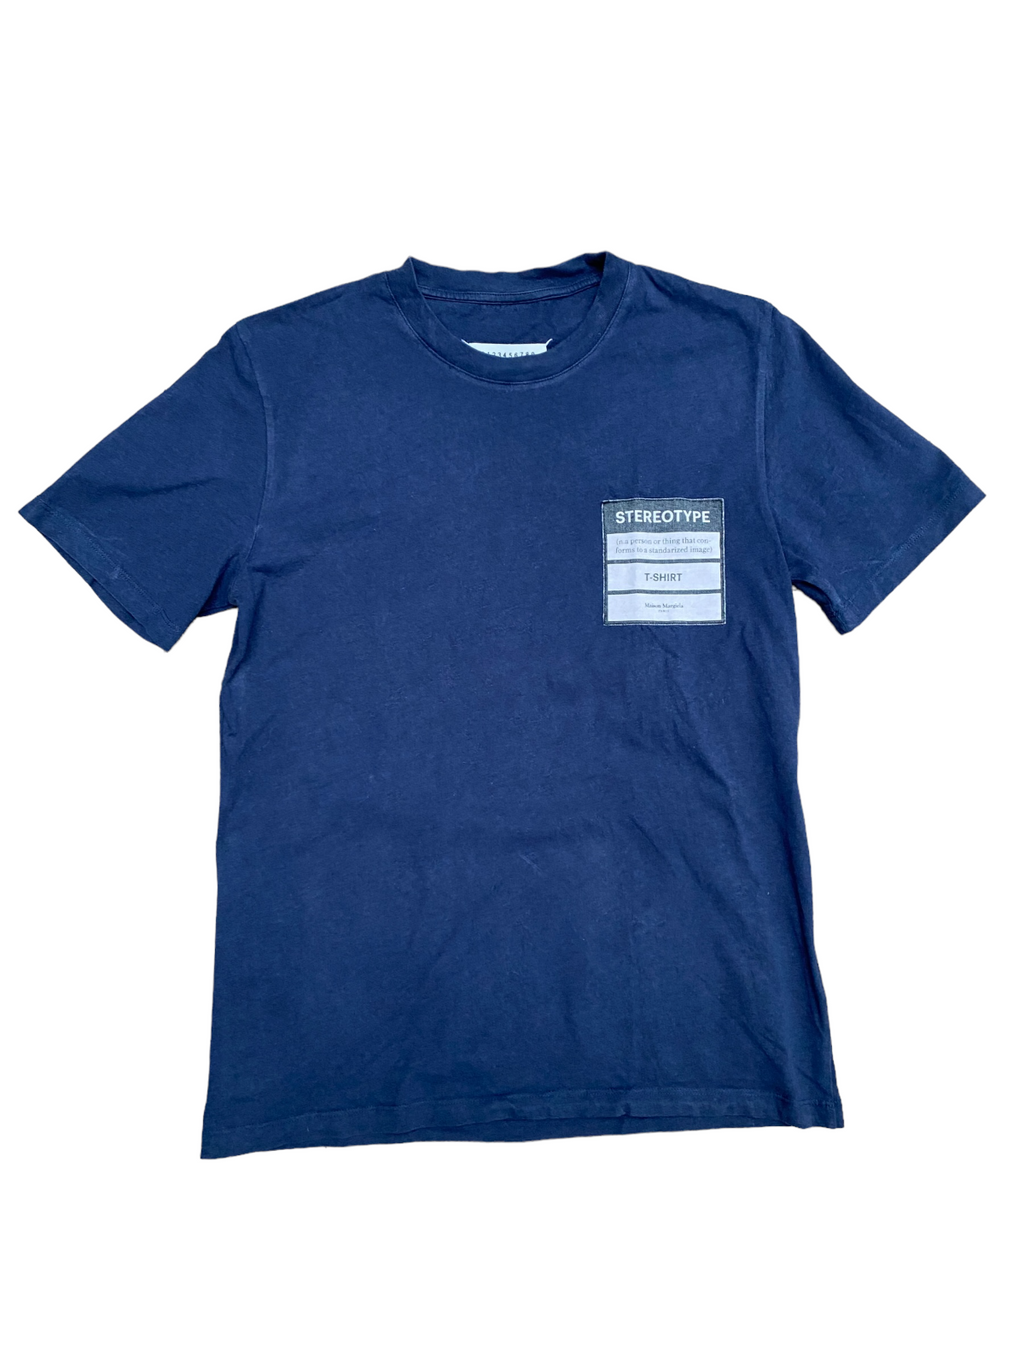 Navy Stereotype T-shirt